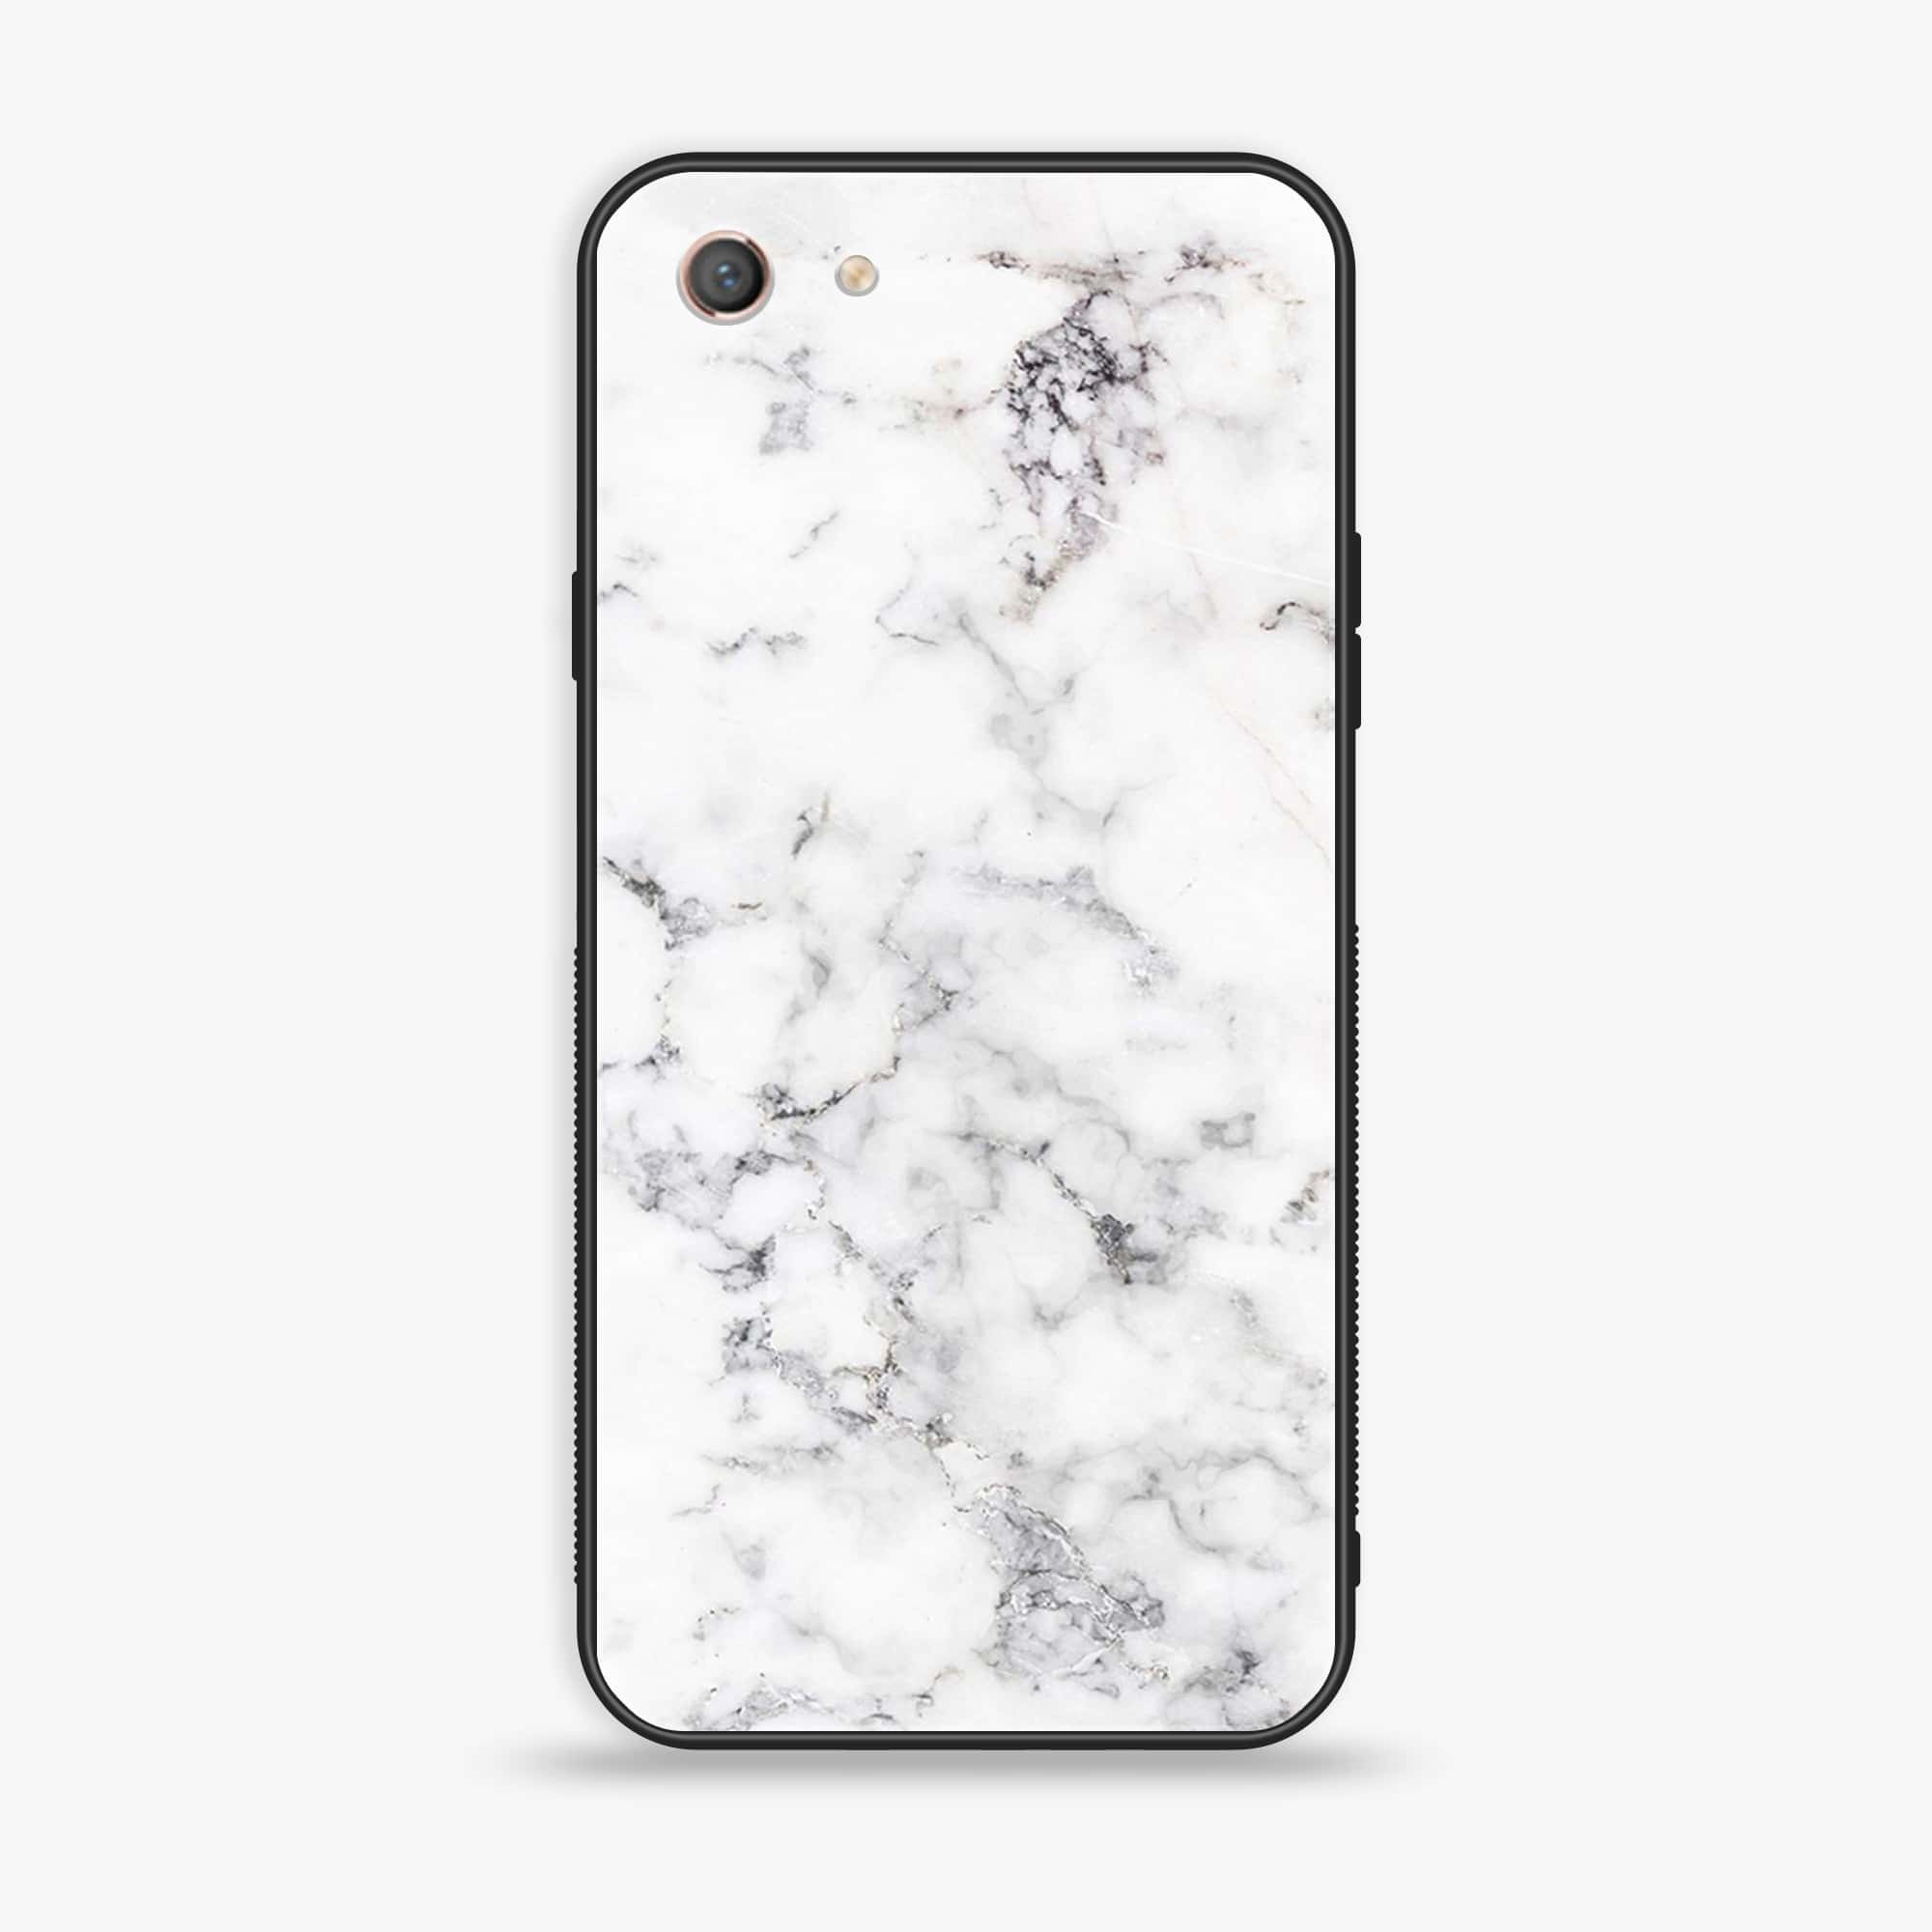 Oppo A71 (2018) - White Marble Series - Premium Printed Glass soft Bumper shock Proof Case